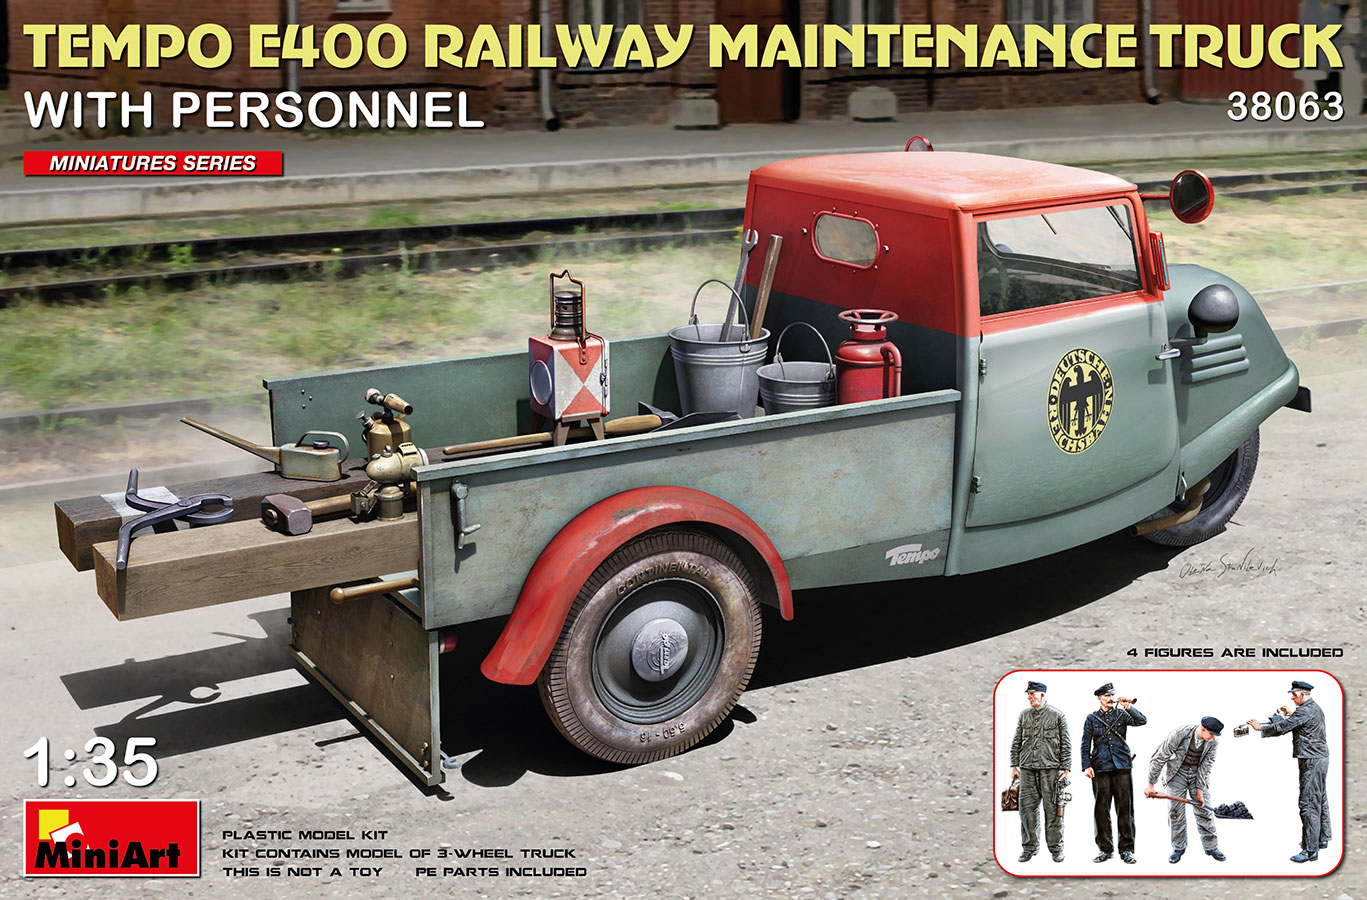 1/35 Tempo E400  Railway Maintenance Truck with Personnel - Miniart